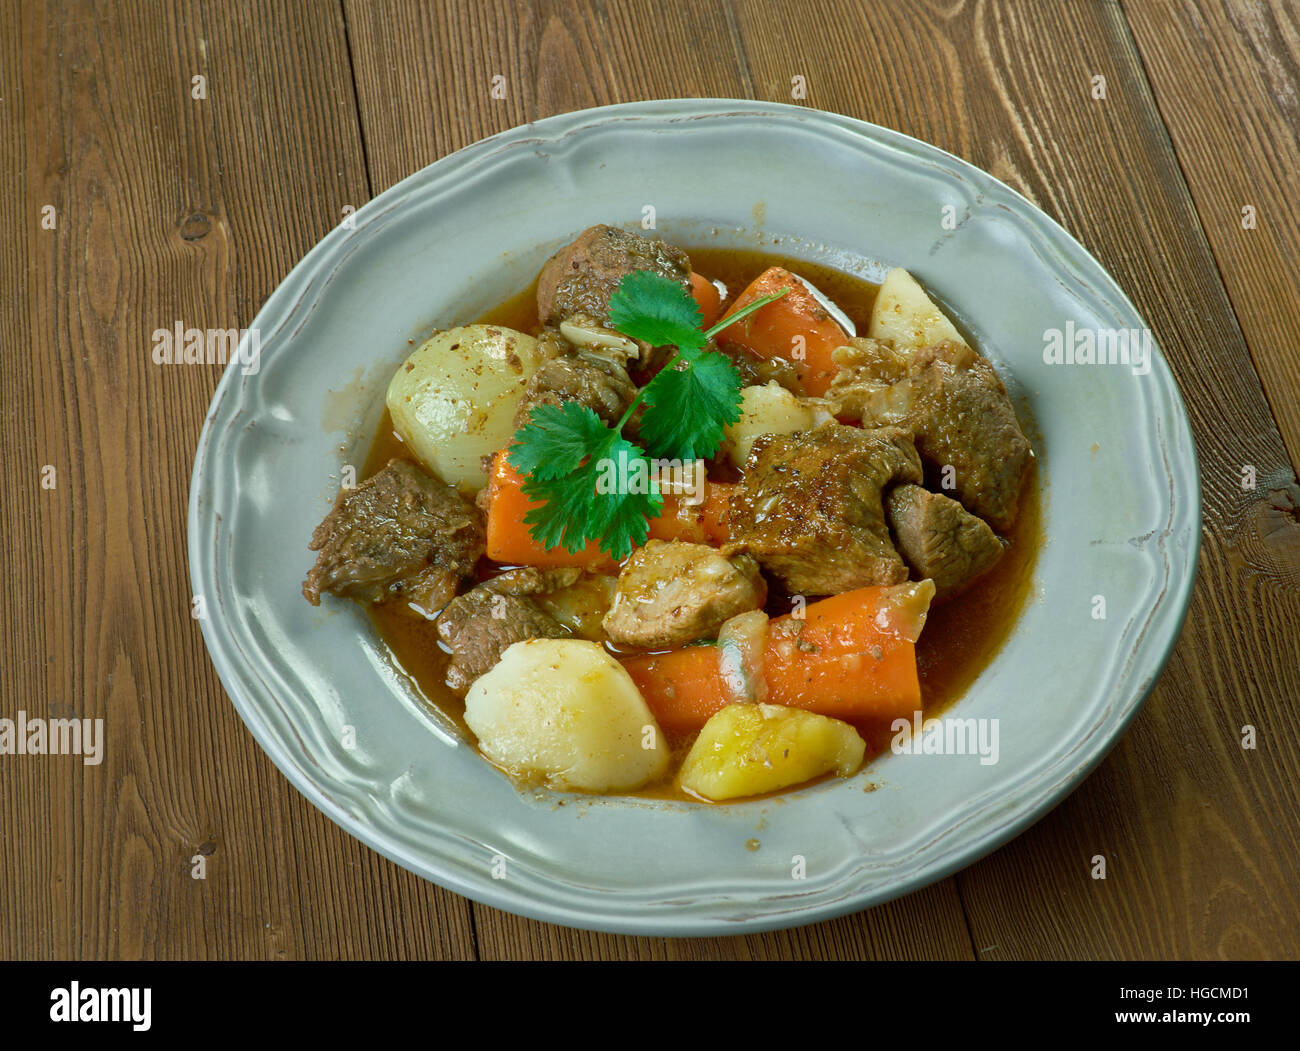 Boeuf a la mode -  French version of what is known in the United States as pot roast,braised beef dish, Stock Photo